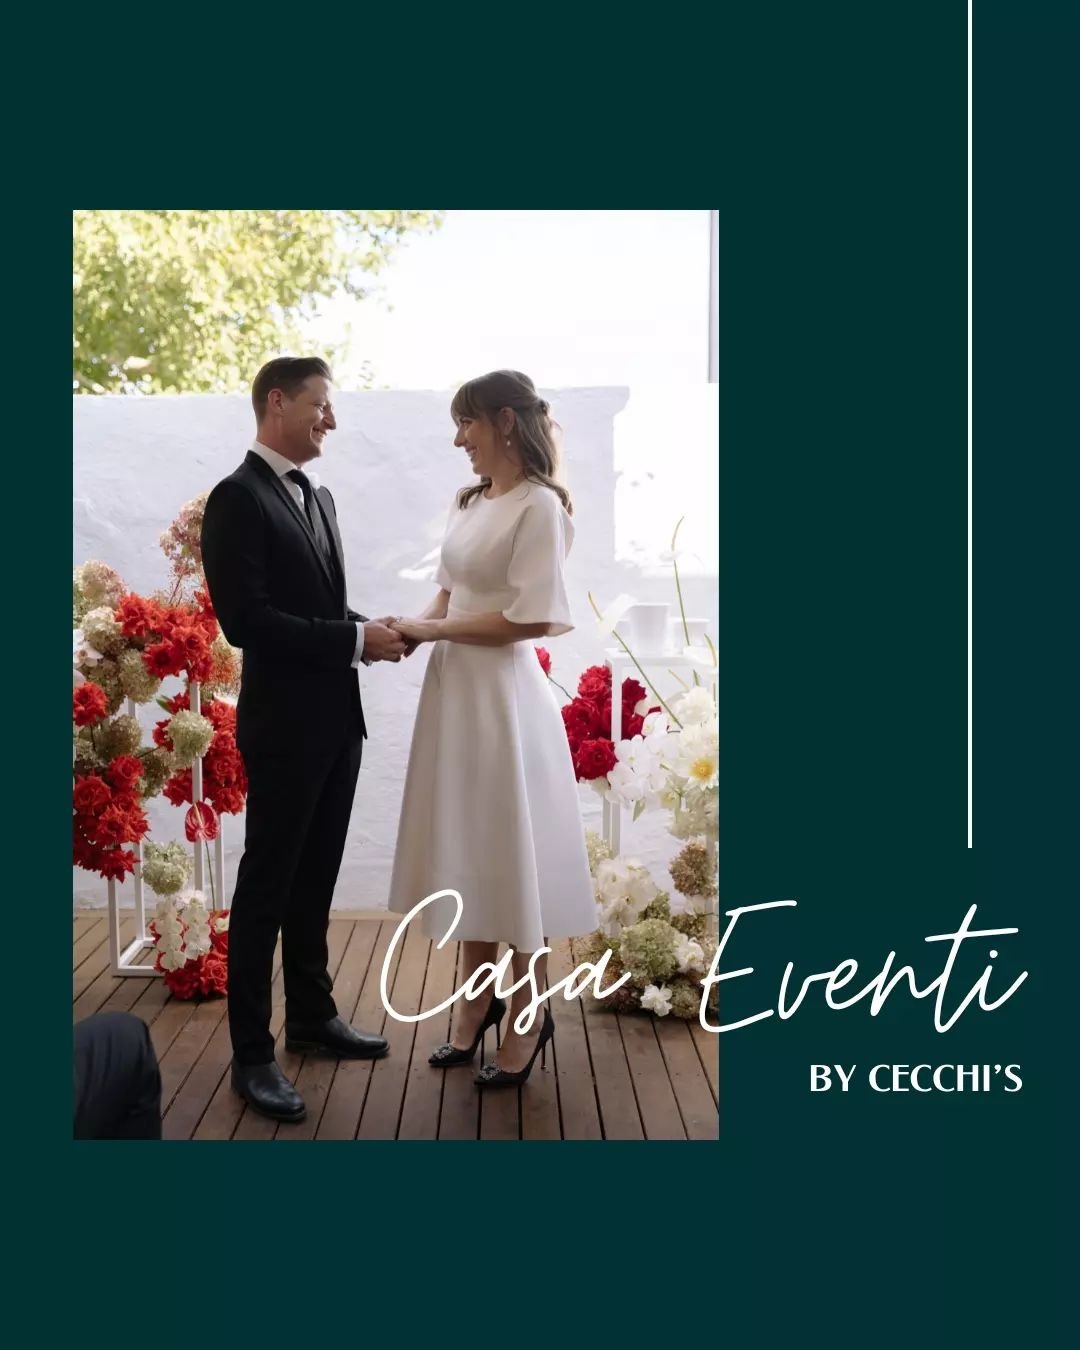 Casa Eventi! 🌹 Functions at 965 Beaufort!

We&rsquo;d love to host your next event! You can expect the same delicious Italian fare and delectable beverages from our location across the street. Perfect for intimate weddings, bridal &amp; baby showers